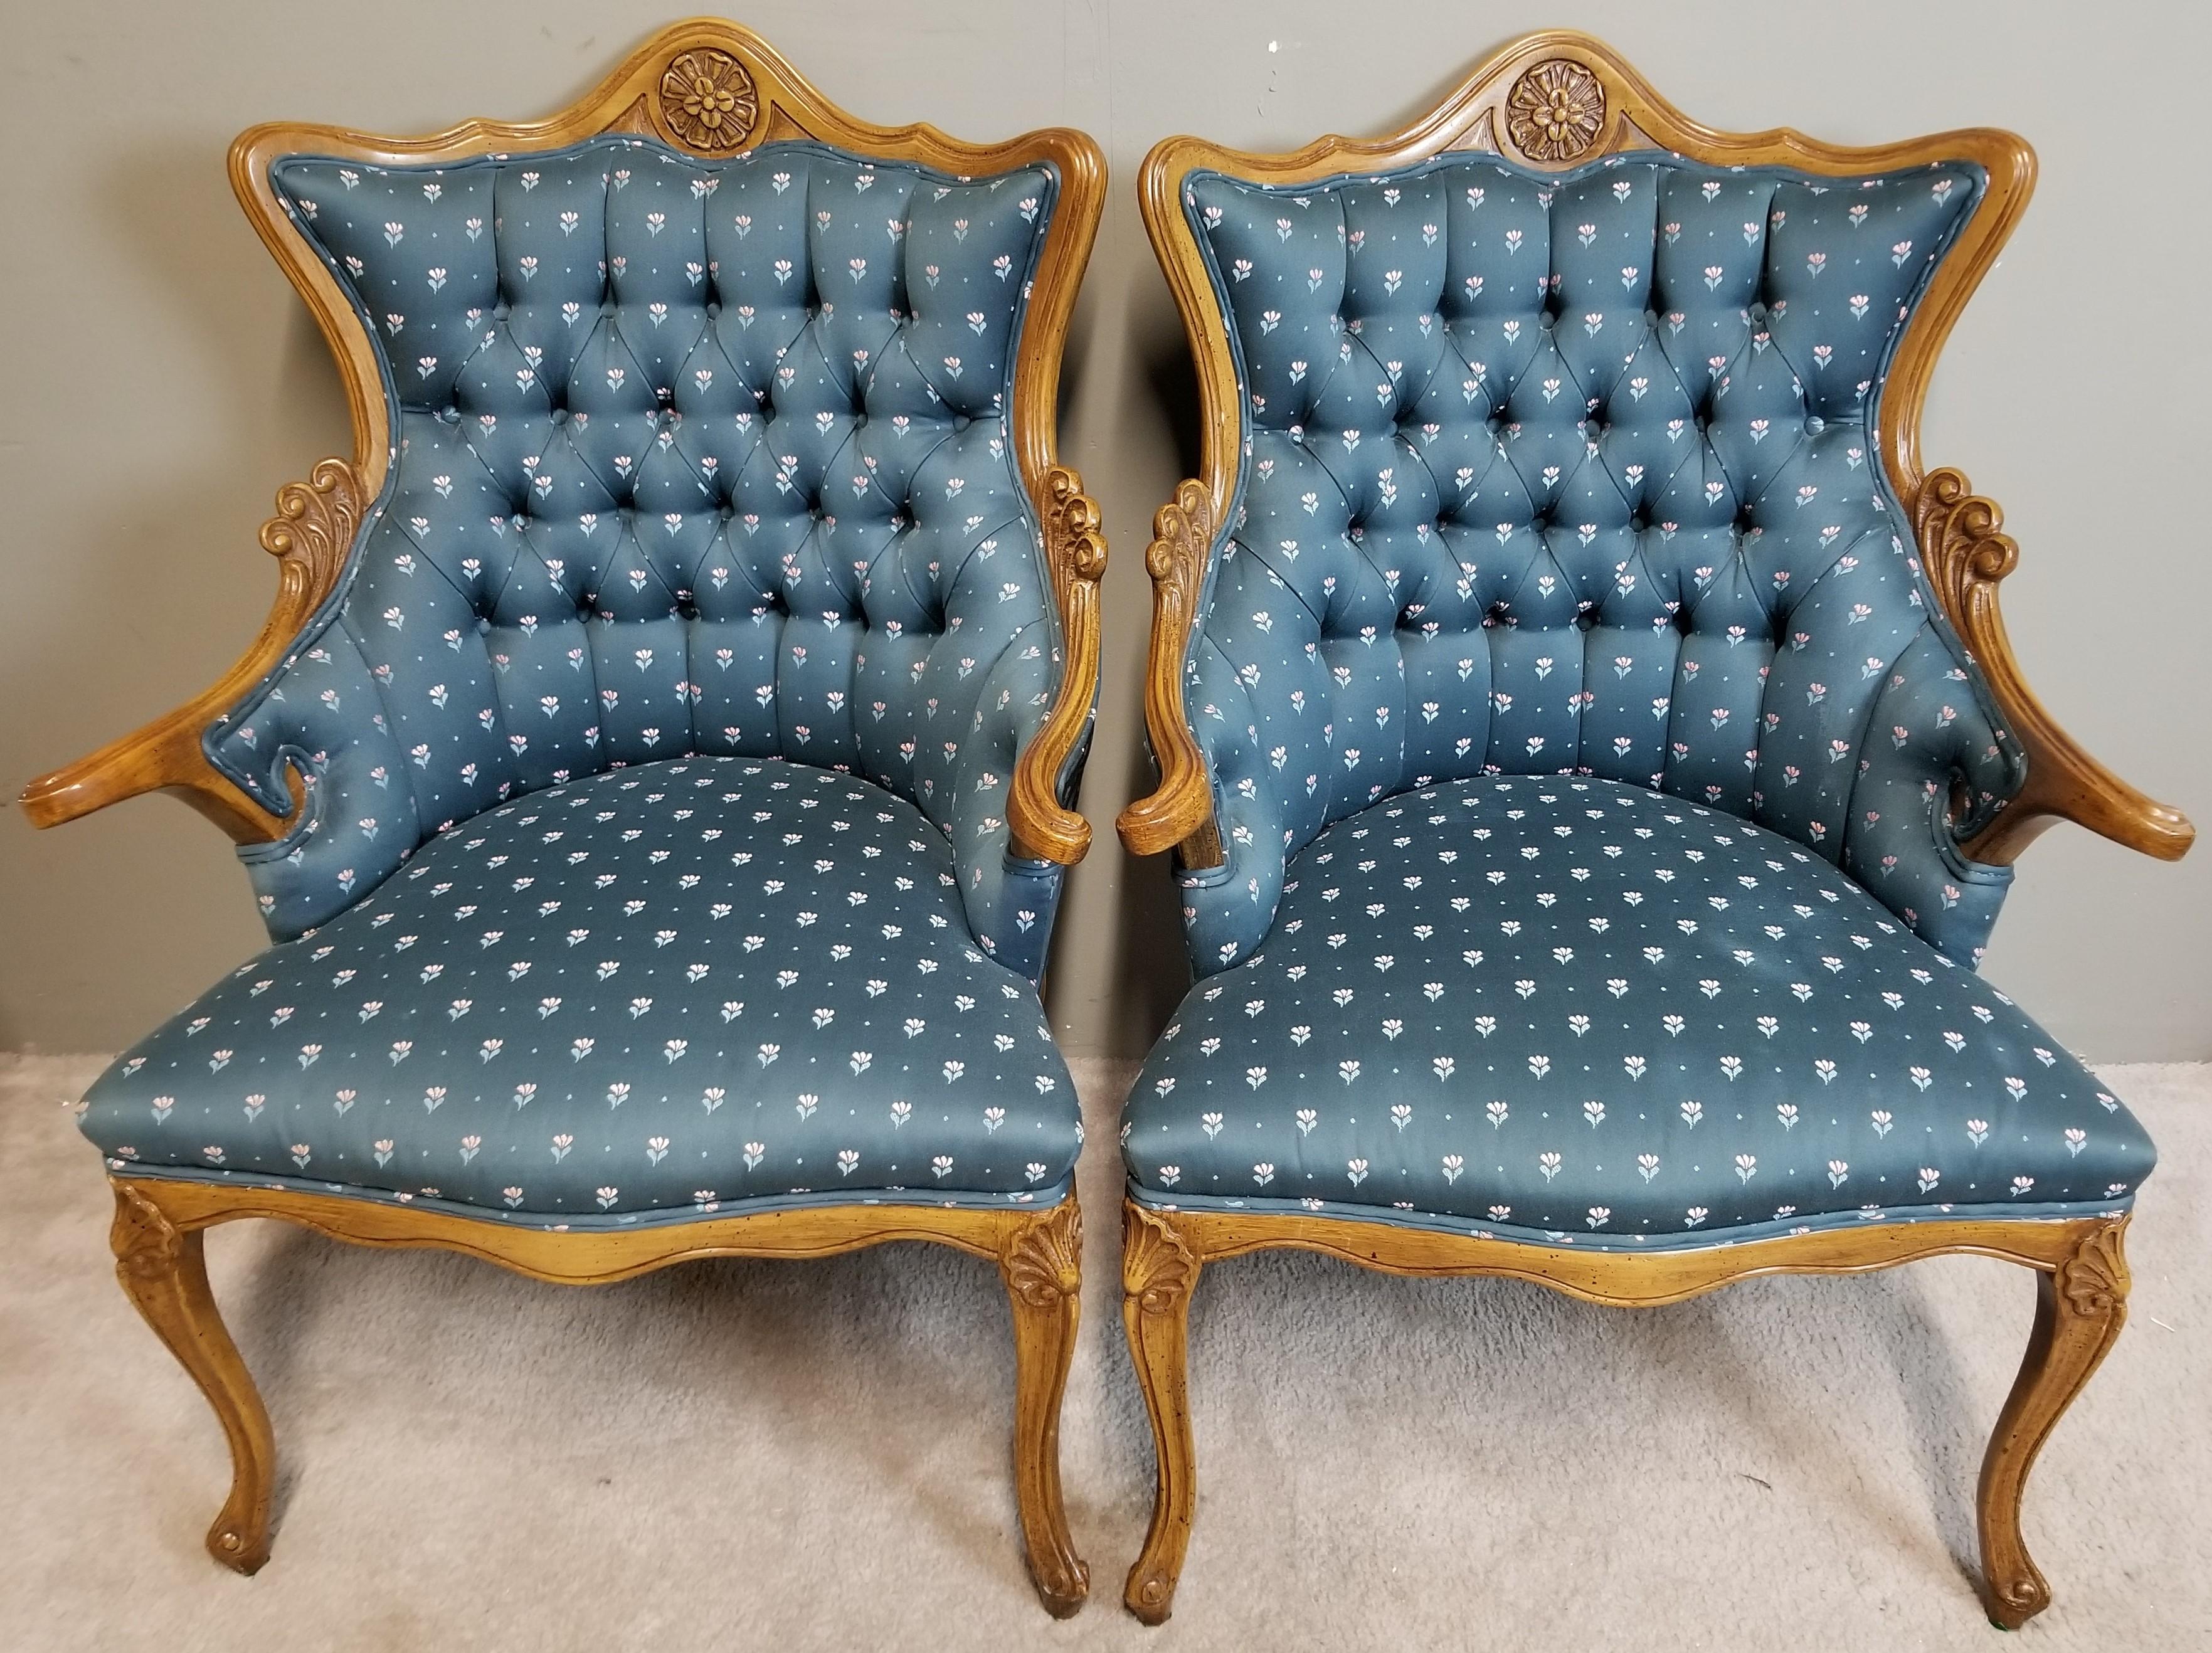 20th Century French Louis XV Tufted Armchairs, a Pair